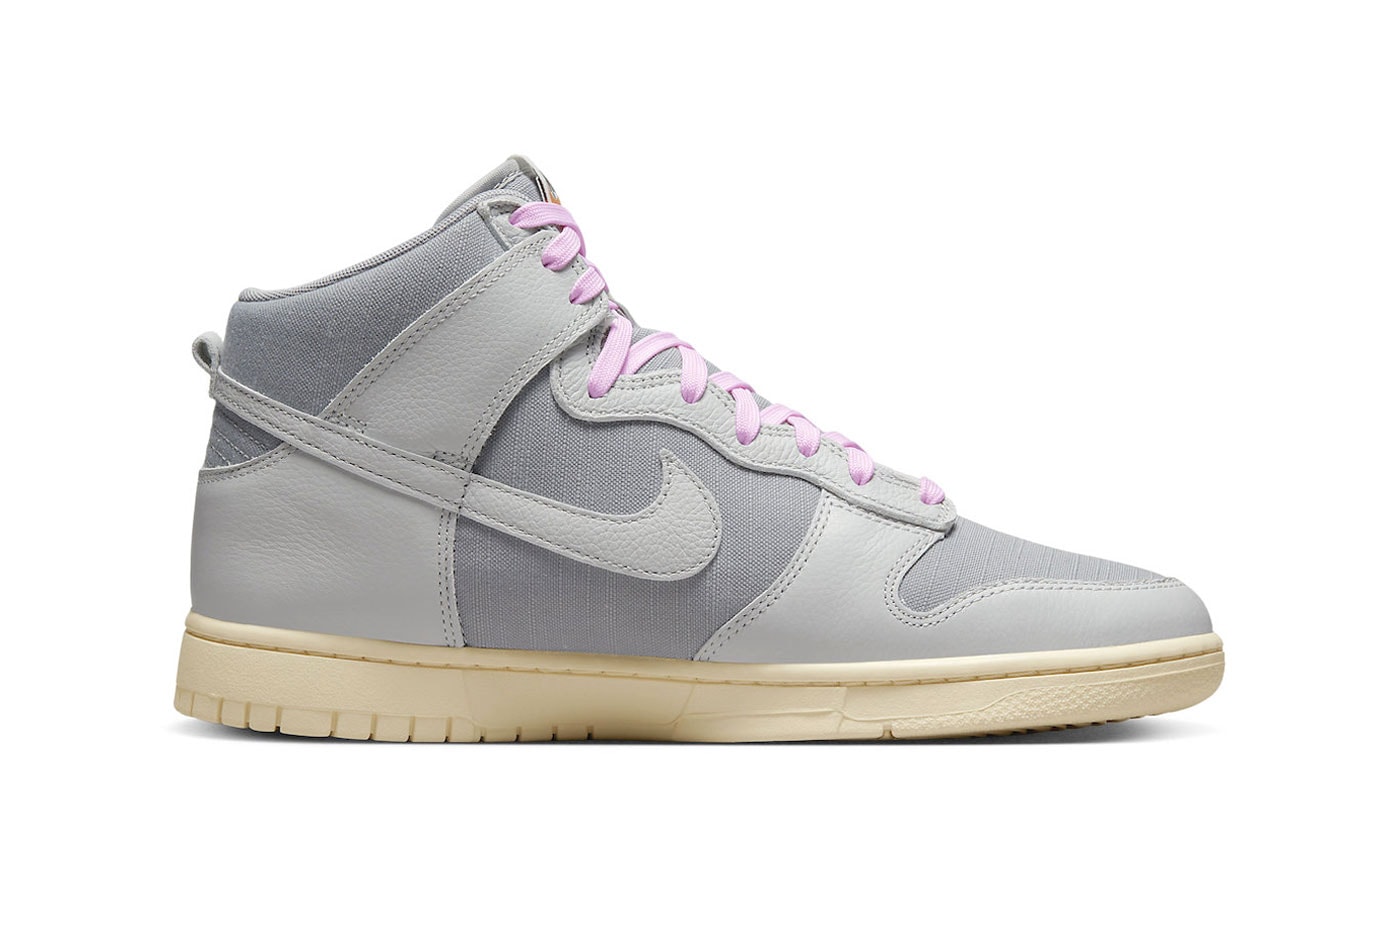 Nike Dunk High "Certified Fresh" Surfaces in a New Grey Fog Colorway DQ8800-001